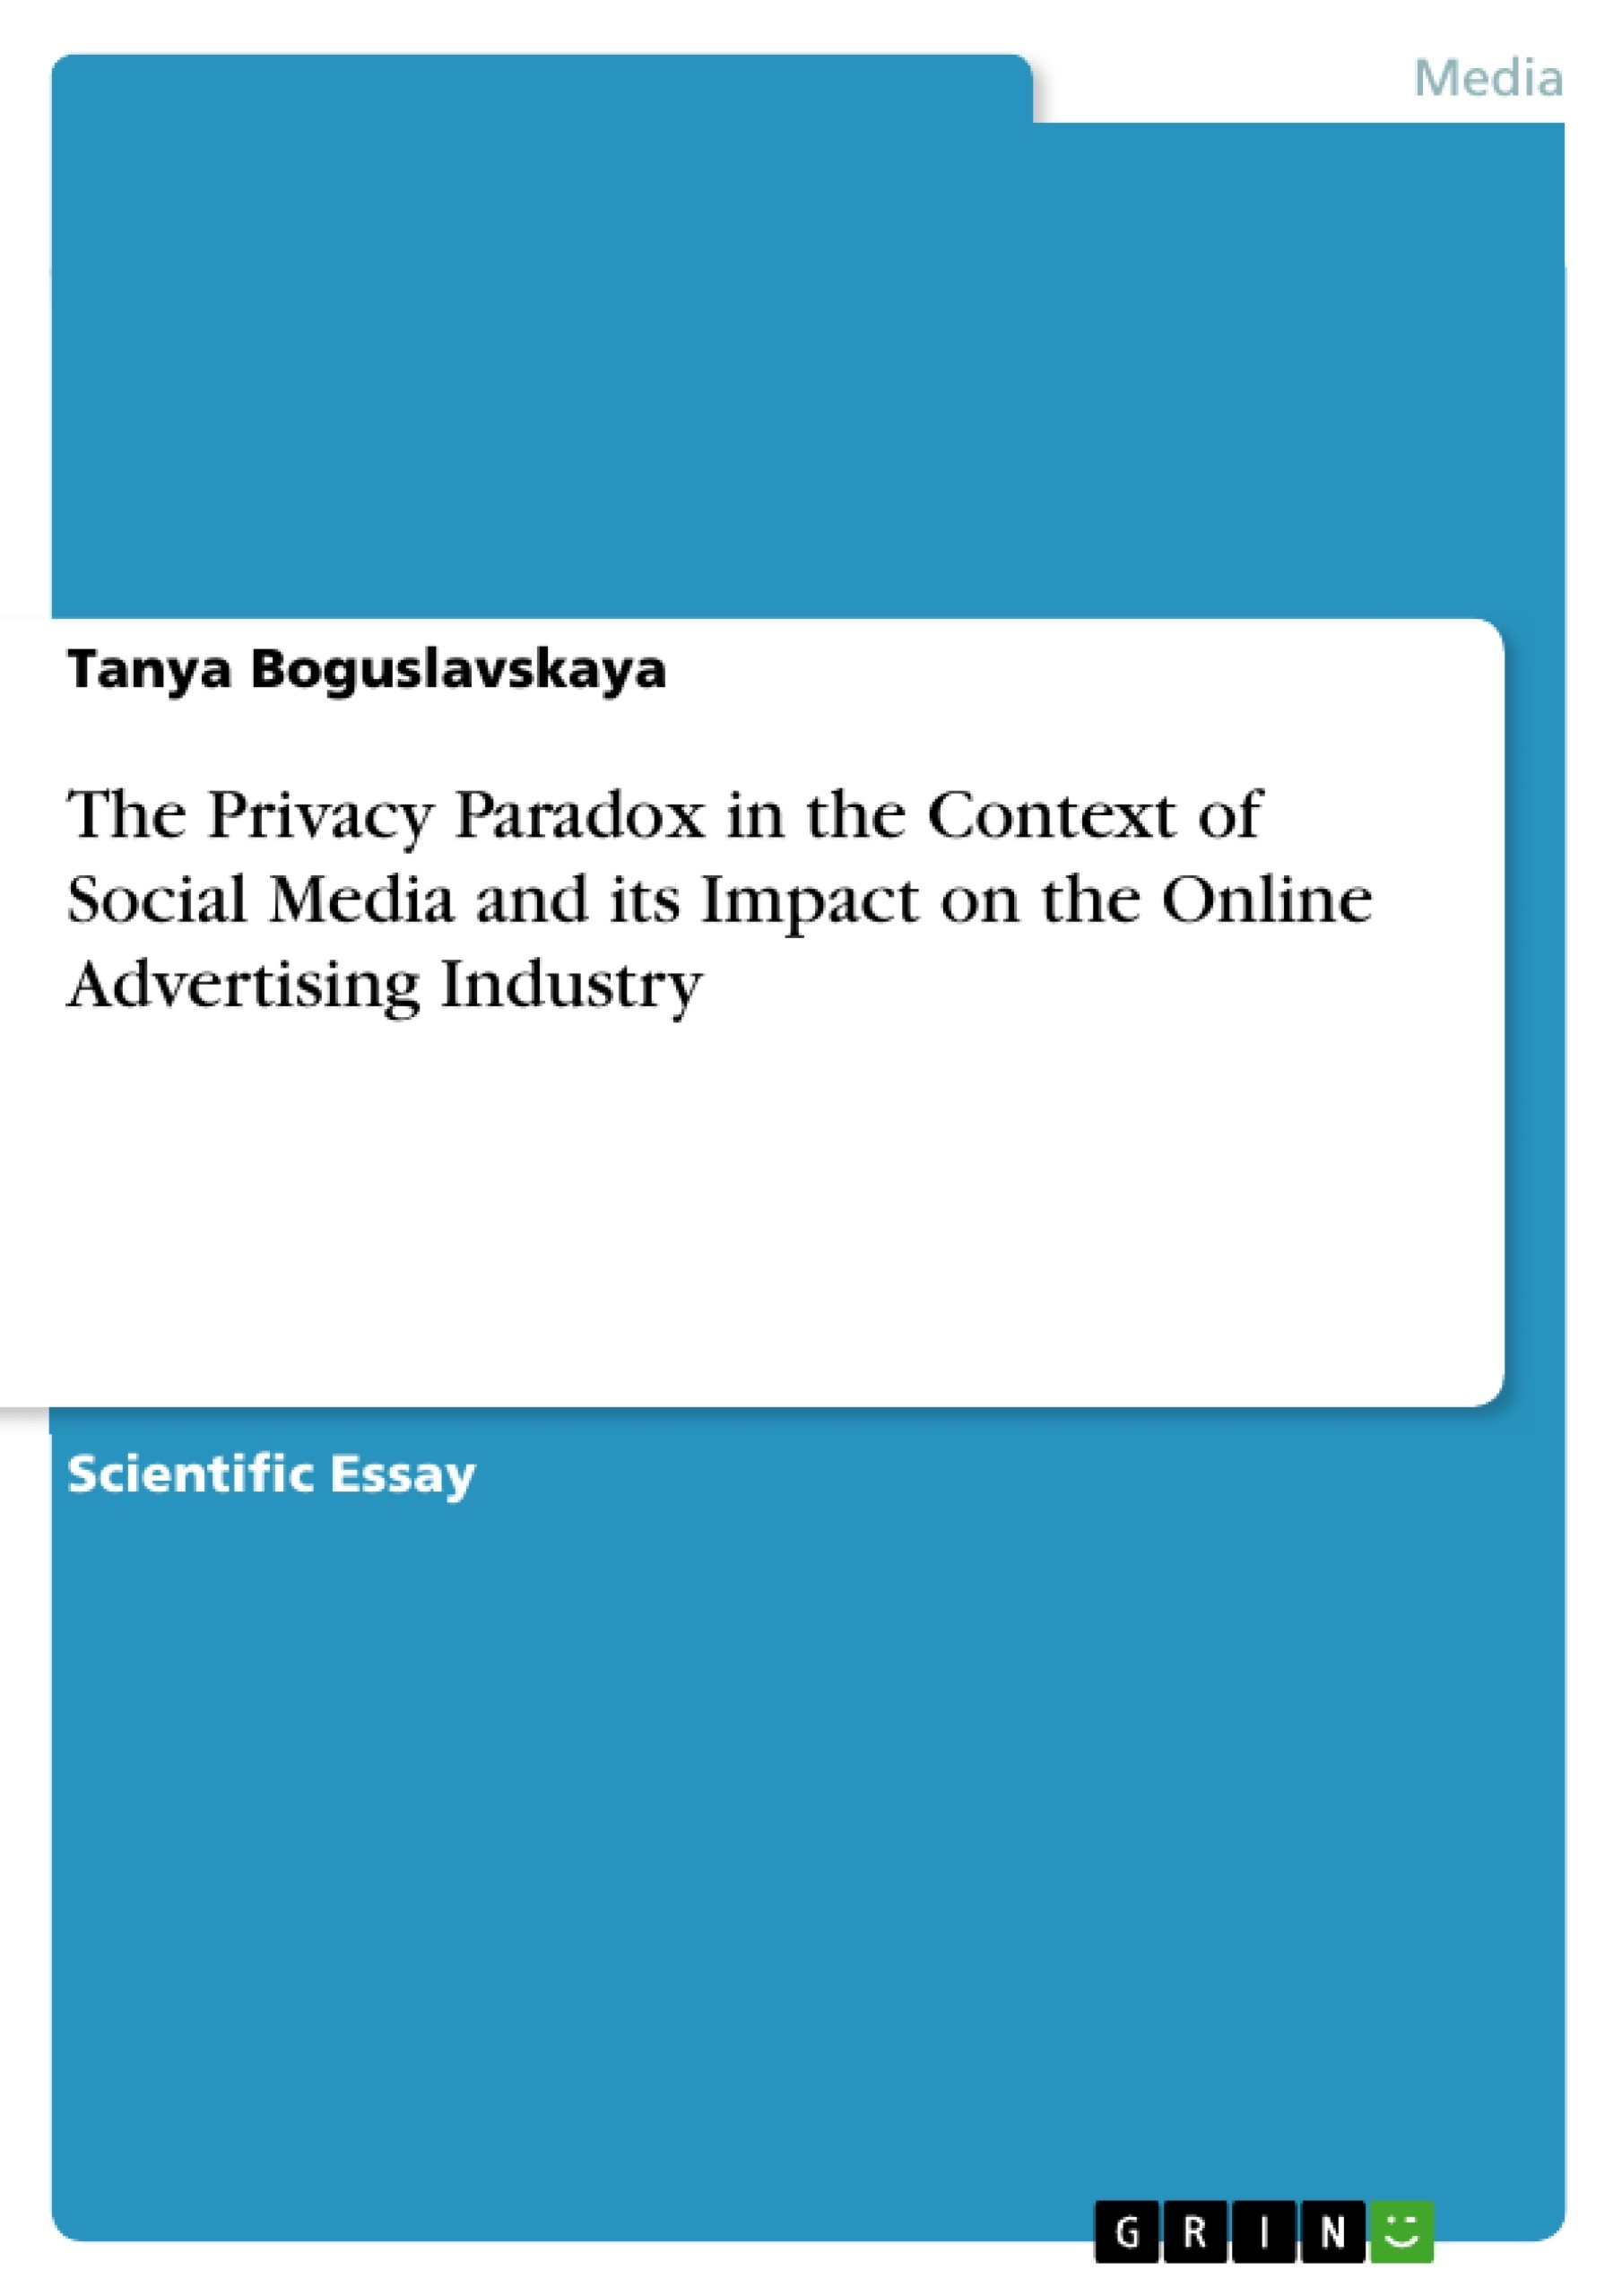 Título: The Privacy Paradox in the Context of Social Media and its Impact on the Online Advertising Industry